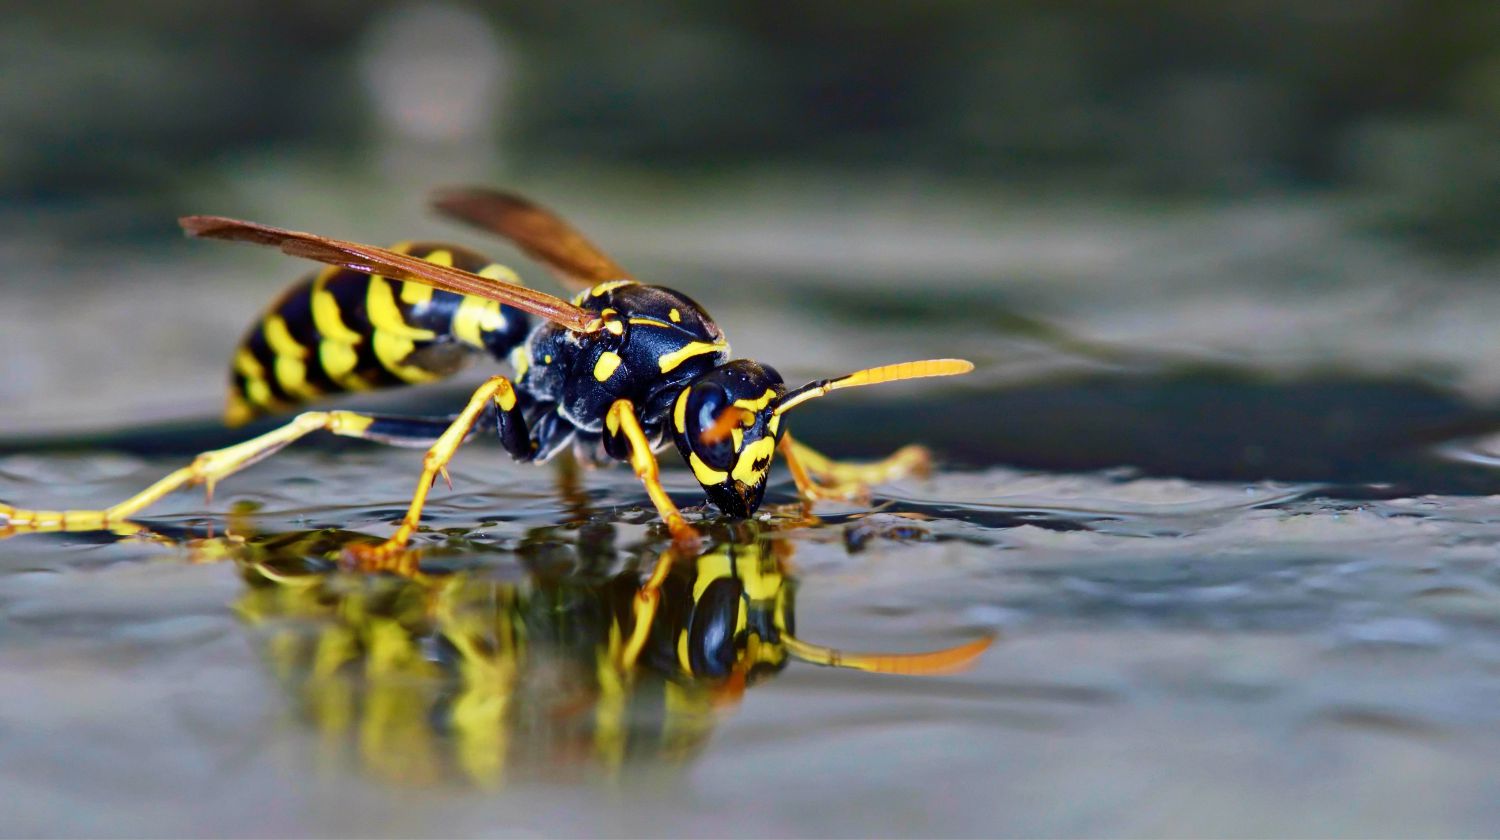 Polistes sp. wasp on water | Ways To Deter Wasps Naturally | Featured